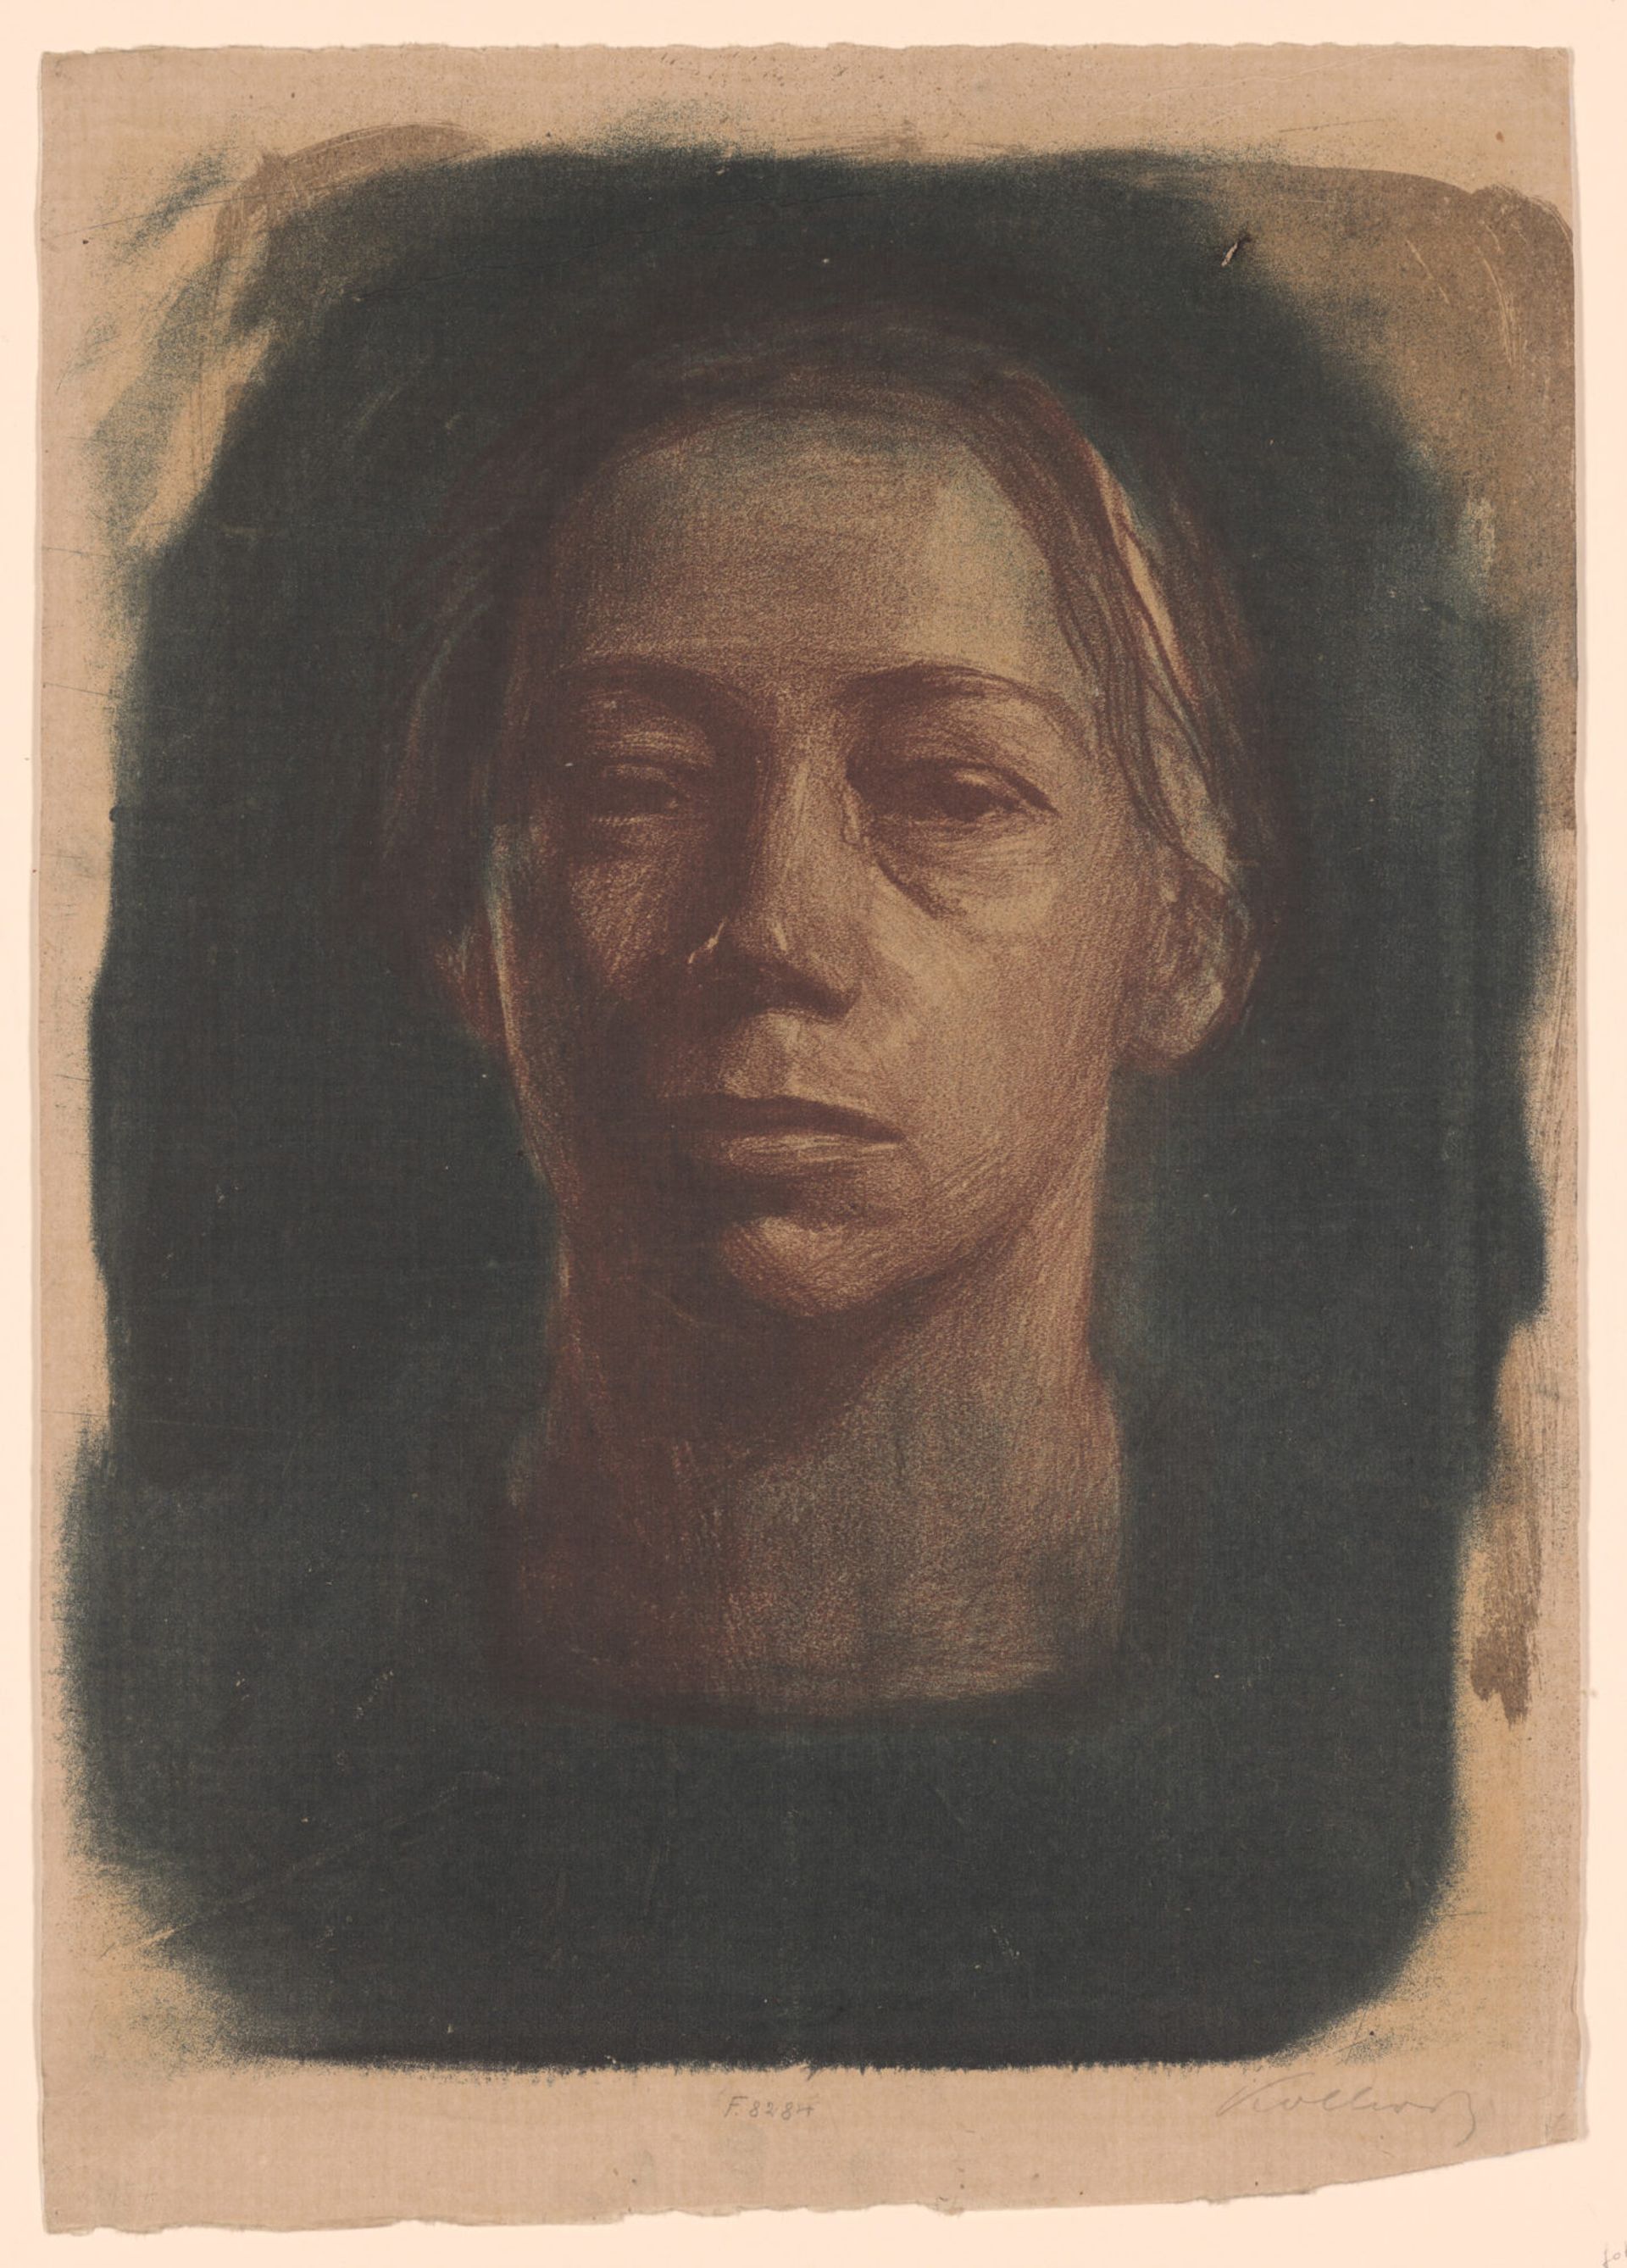 Käthe Kollwitz, Self-portrait en face (1904). Edition: one of 12 known impressions. Courtesy The Museum of Modern Art, New York. Jointly owned by The Museum of Modern Art, New York, and Neue Galerie, New York. 